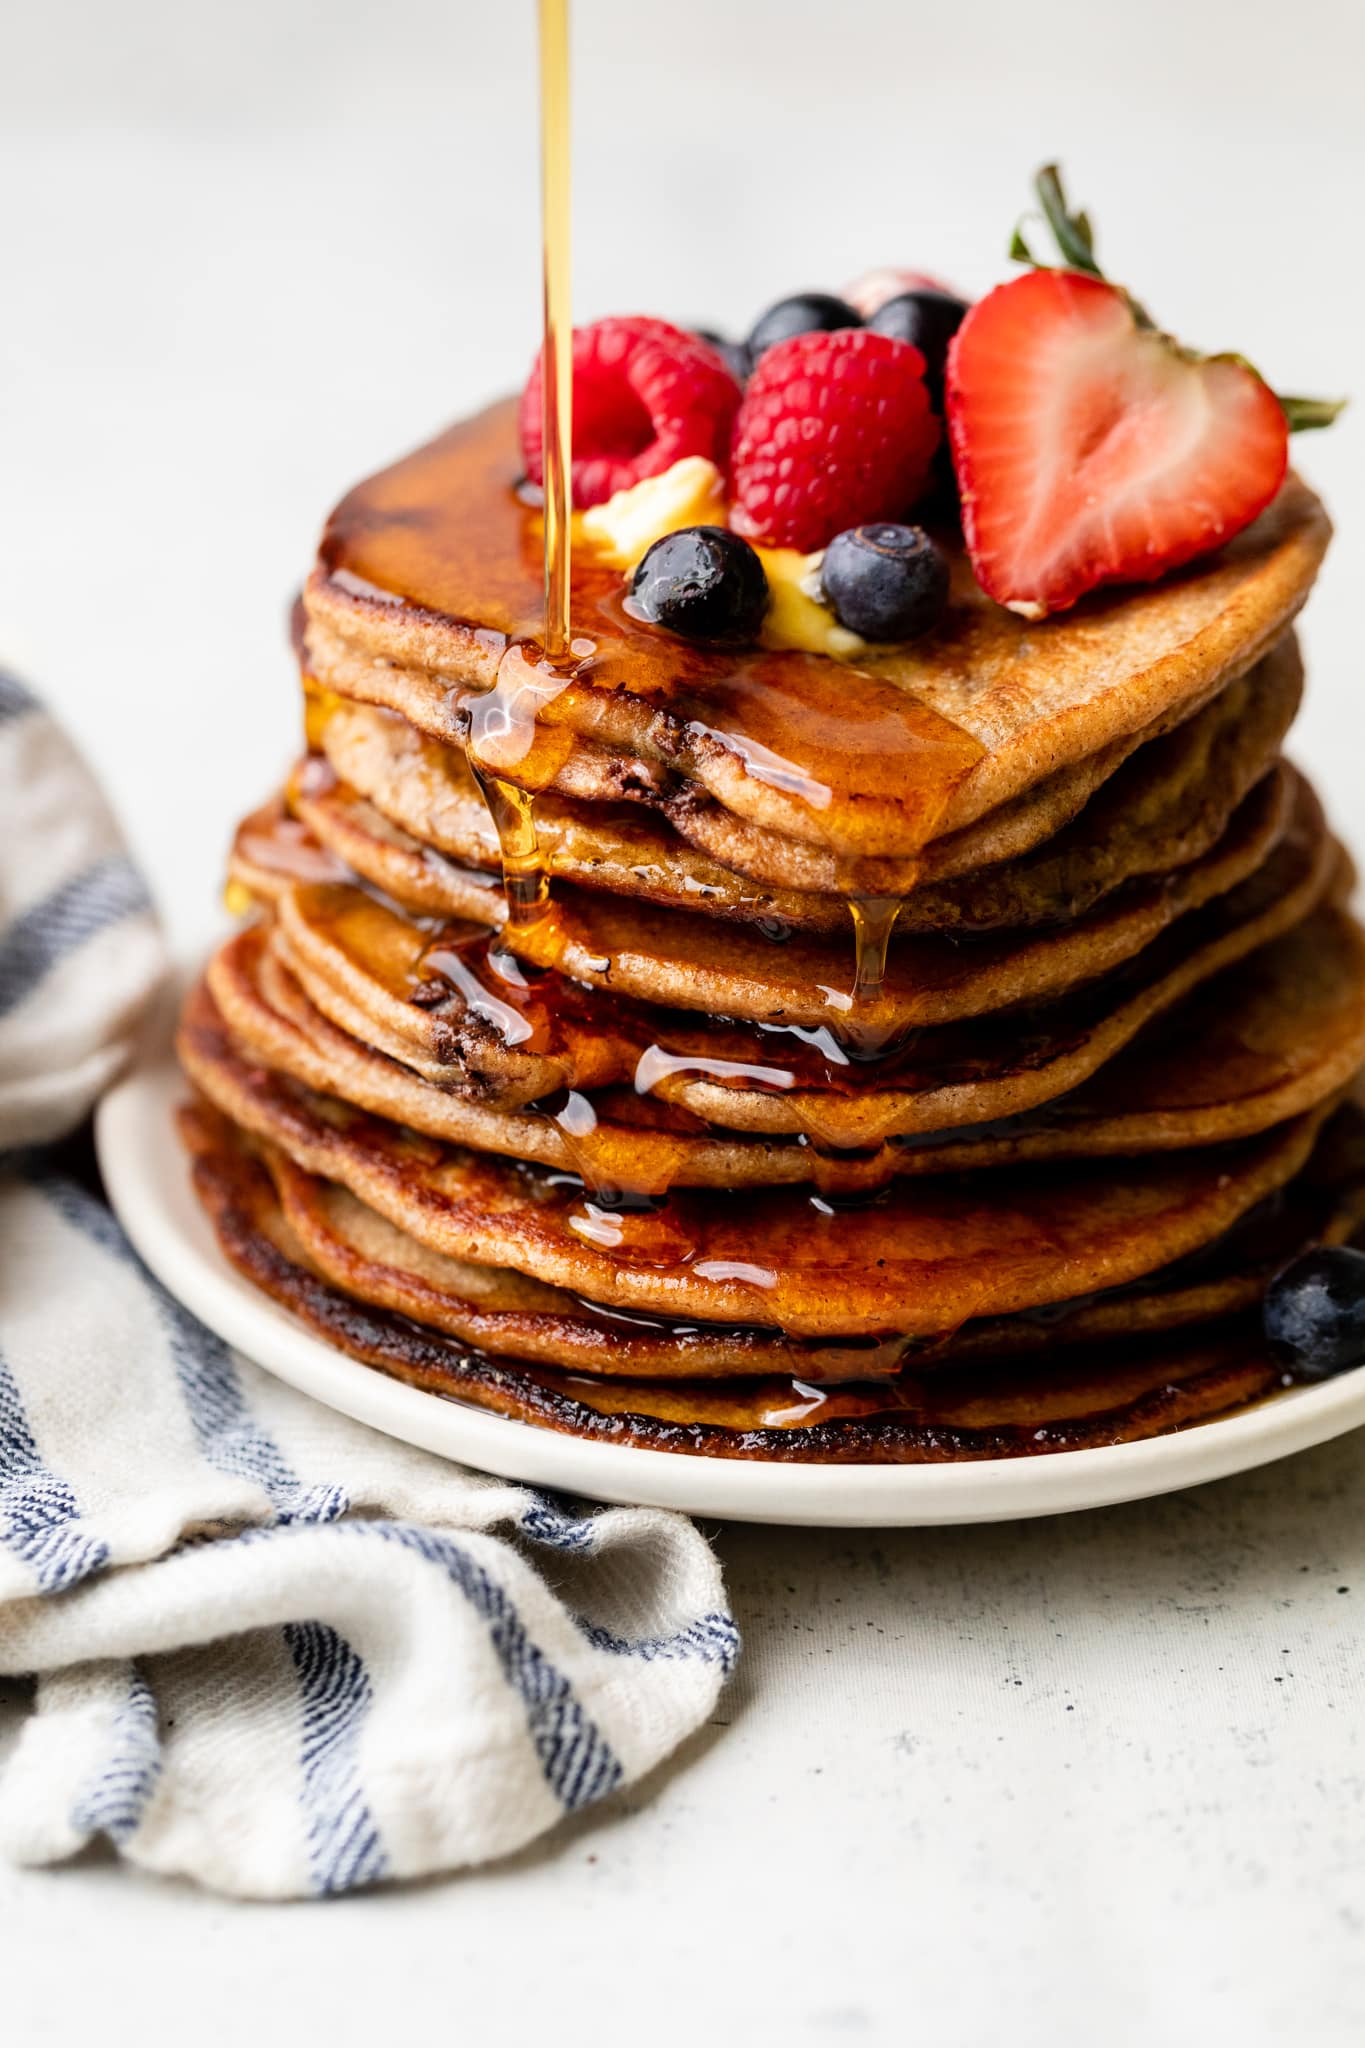 The Best Mother's Day Brunch Recipes - All the Healthy Things